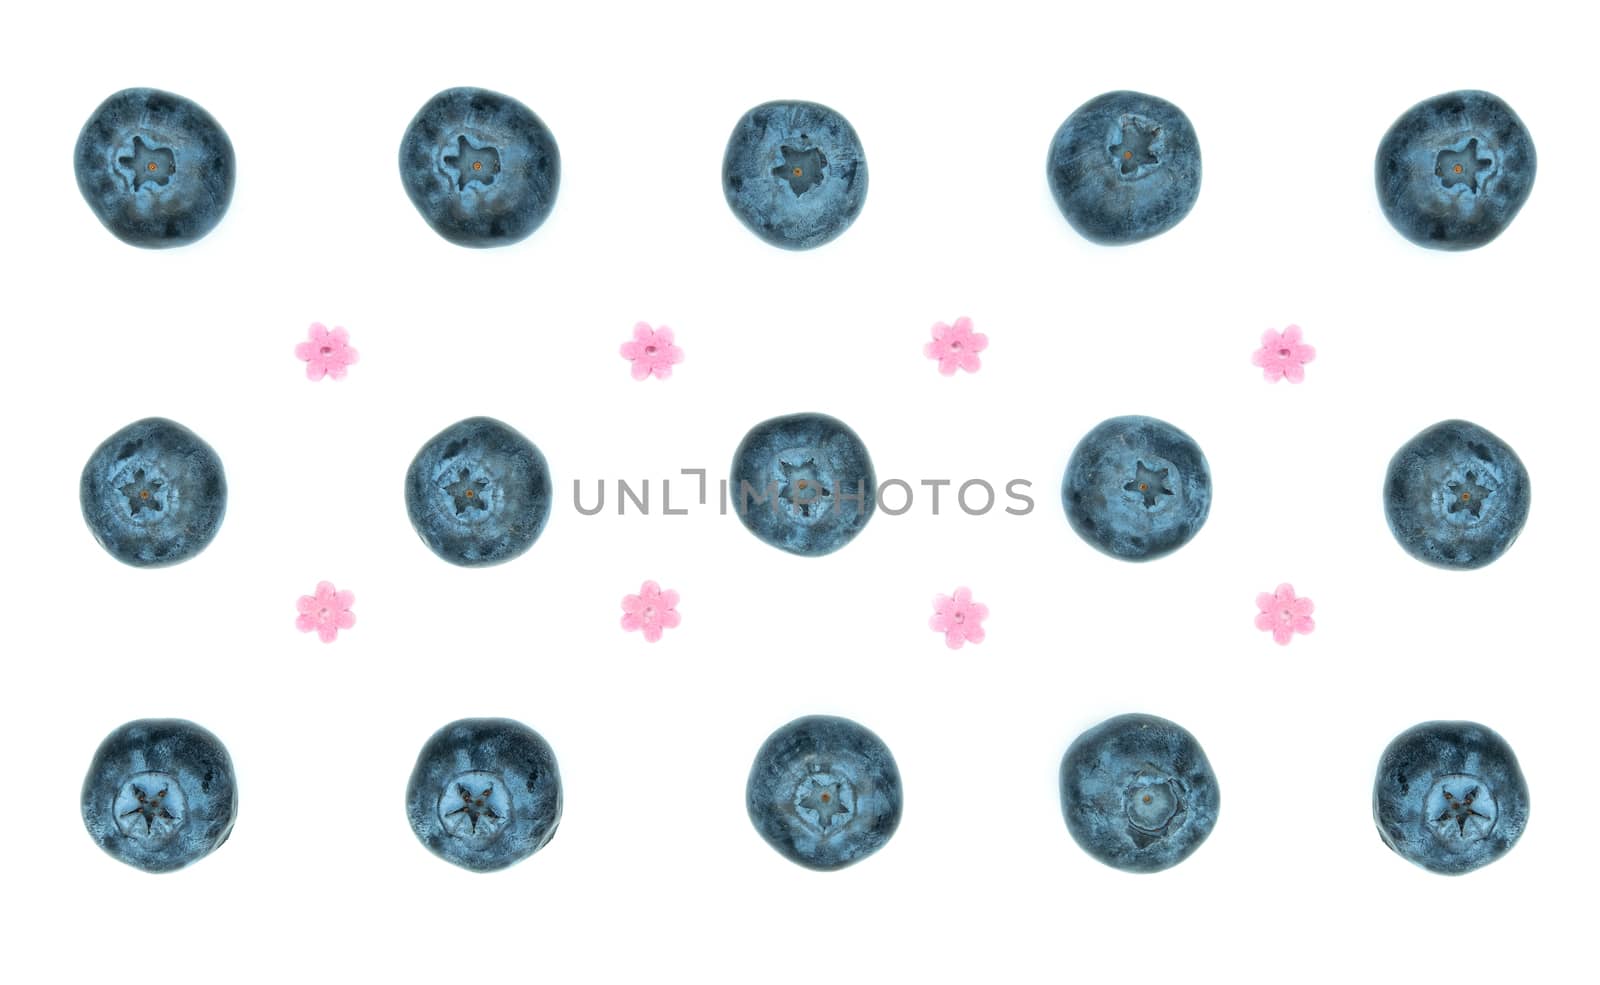 Blueberries on white background by Nawoot